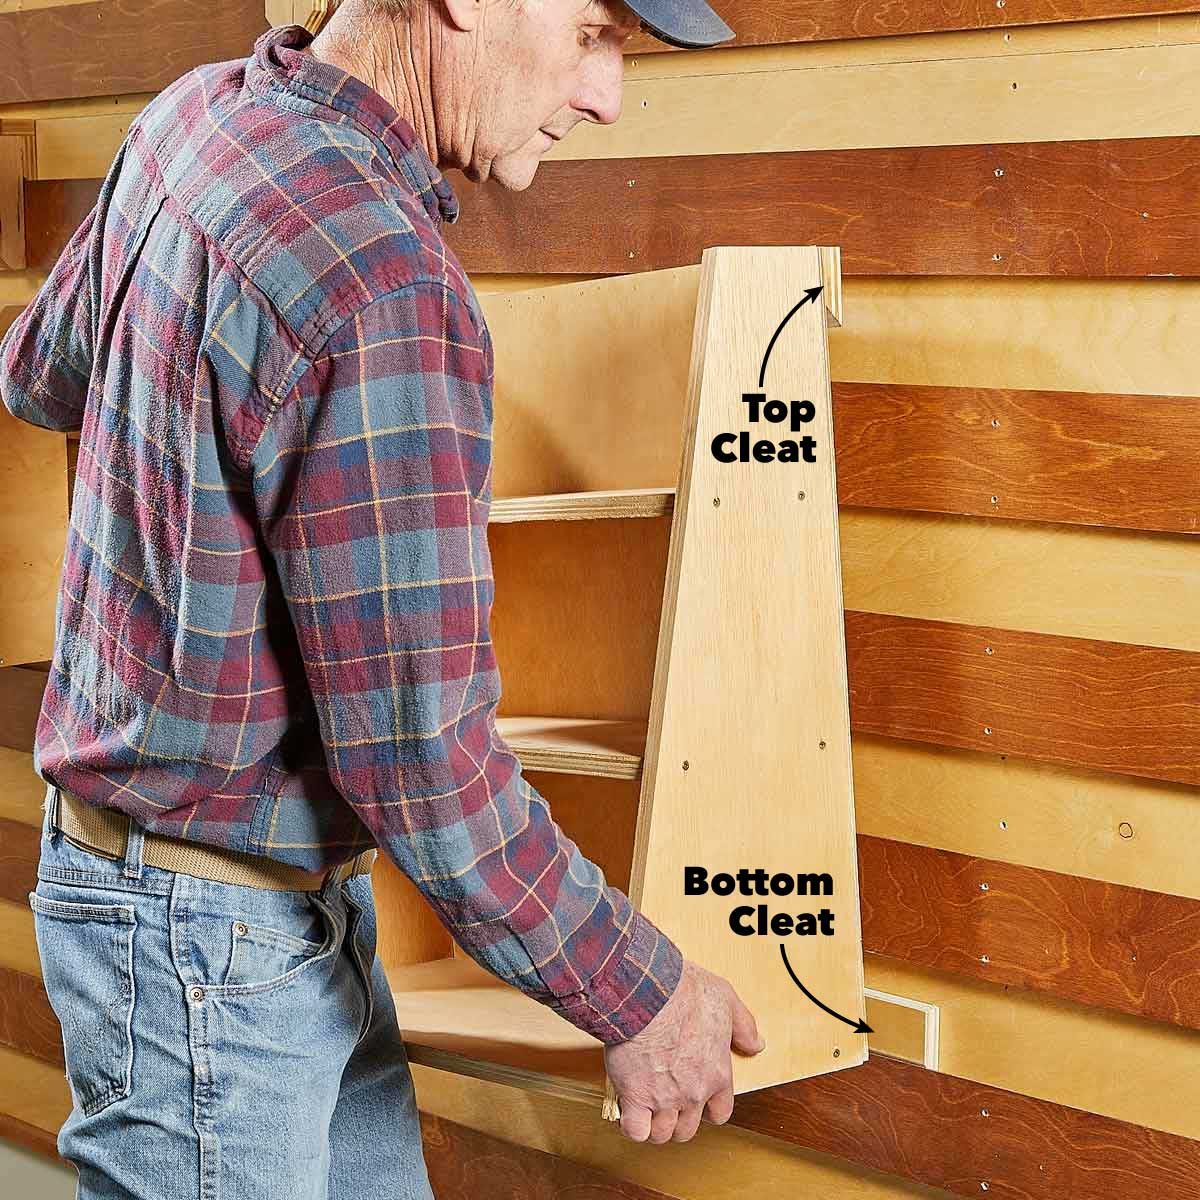 https://www.familyhandyman.com/wp-content/uploads/2019/08/FH18MAY_586_50_032-french-cleat-tool-wall-large-support.jpg?fit=696%2C696